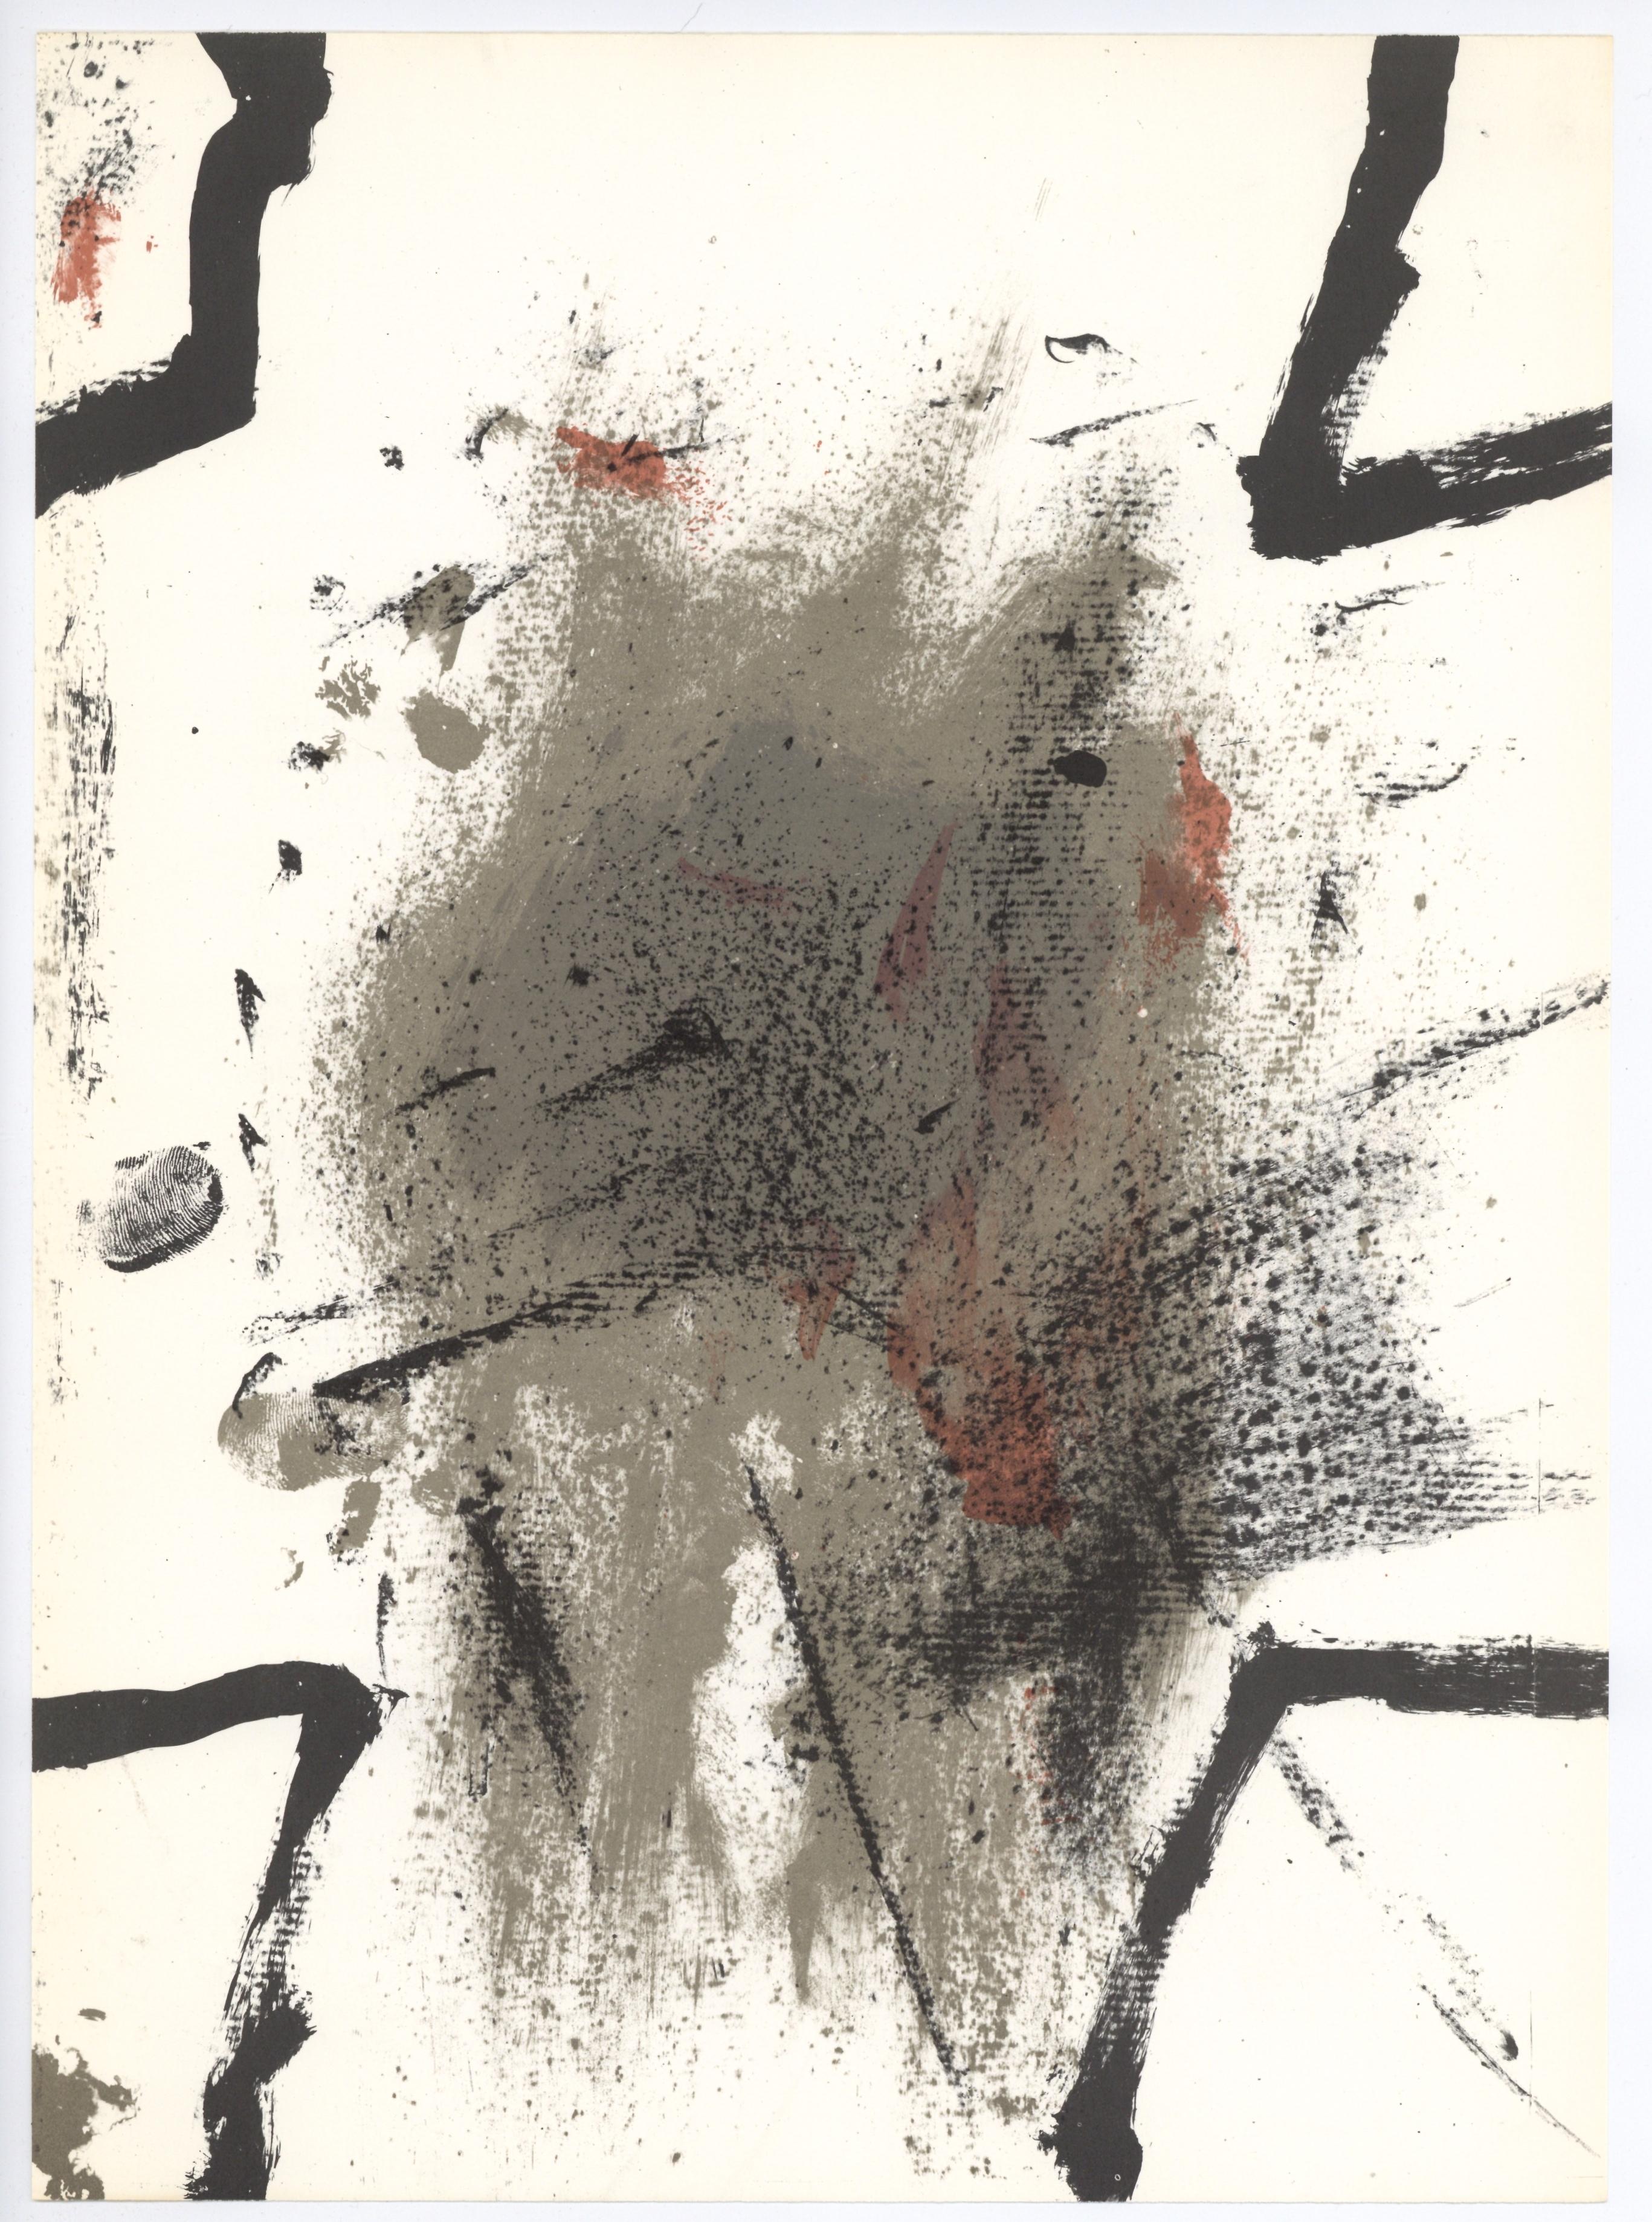 Lithograph on wove paper. Inscription: Unsigned and unnumbered. Good Condition. Notes: From Derrière le miroir, N° 175, published by Derrière le miroir, Paris; printed by Galerie Maeght, Paris, 1968. Excerpted from a Christie’s, New York lot essay,